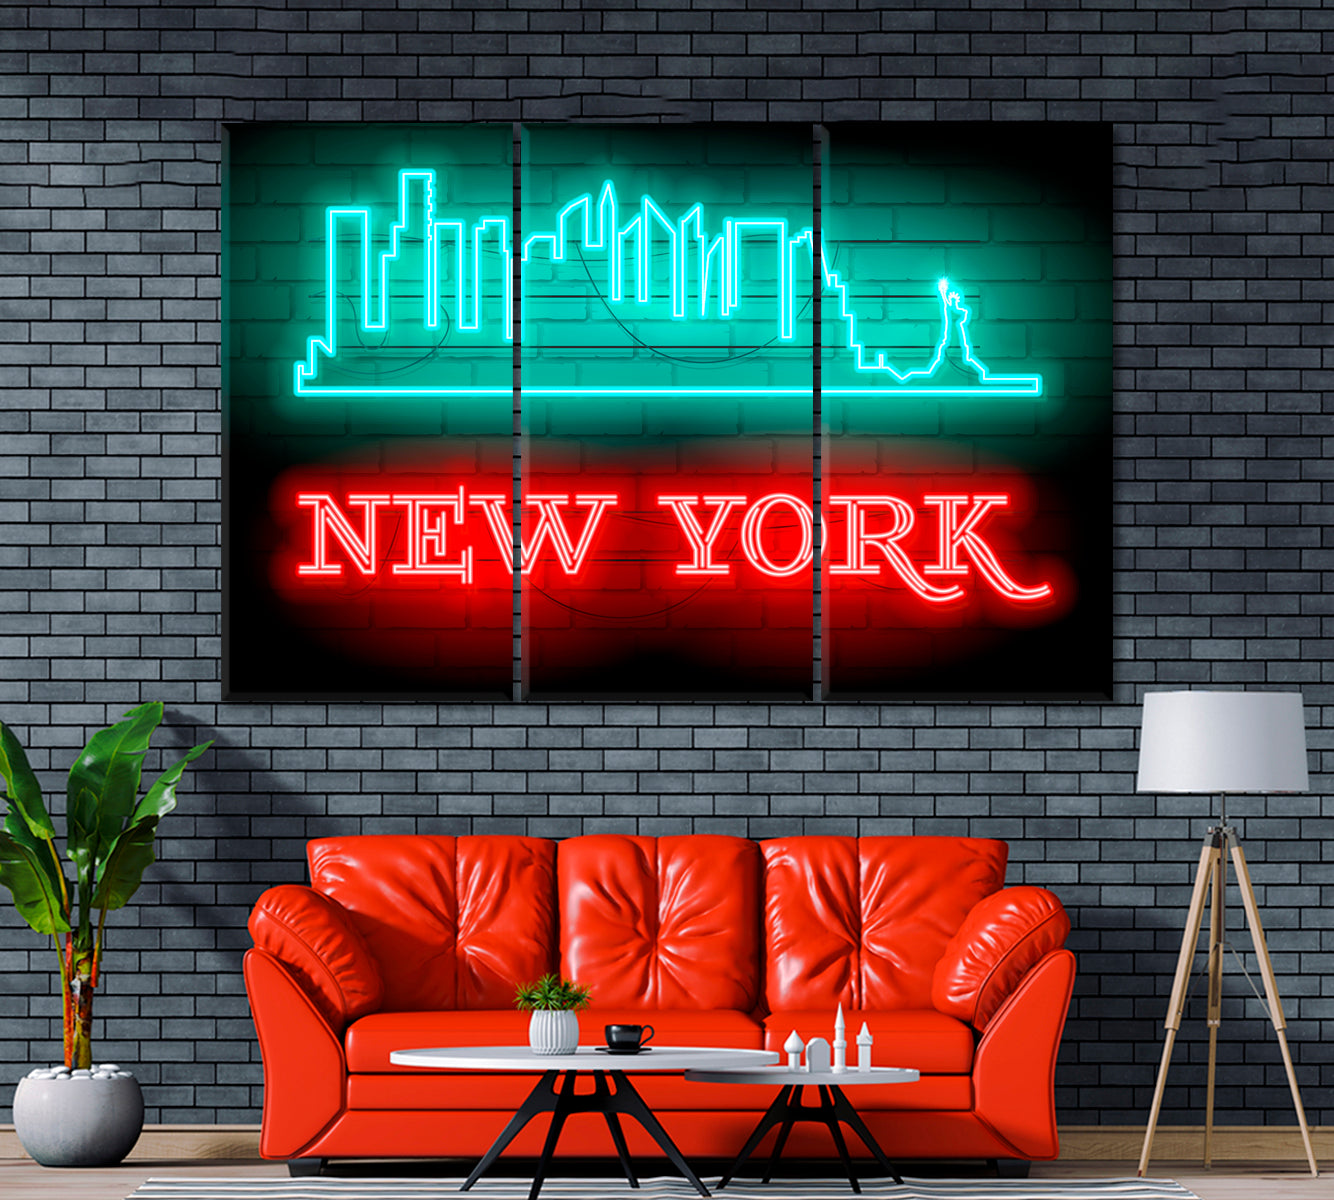 New York Neon Sign Canvas Print ArtLexy 3 Panels 36"x24" inches 